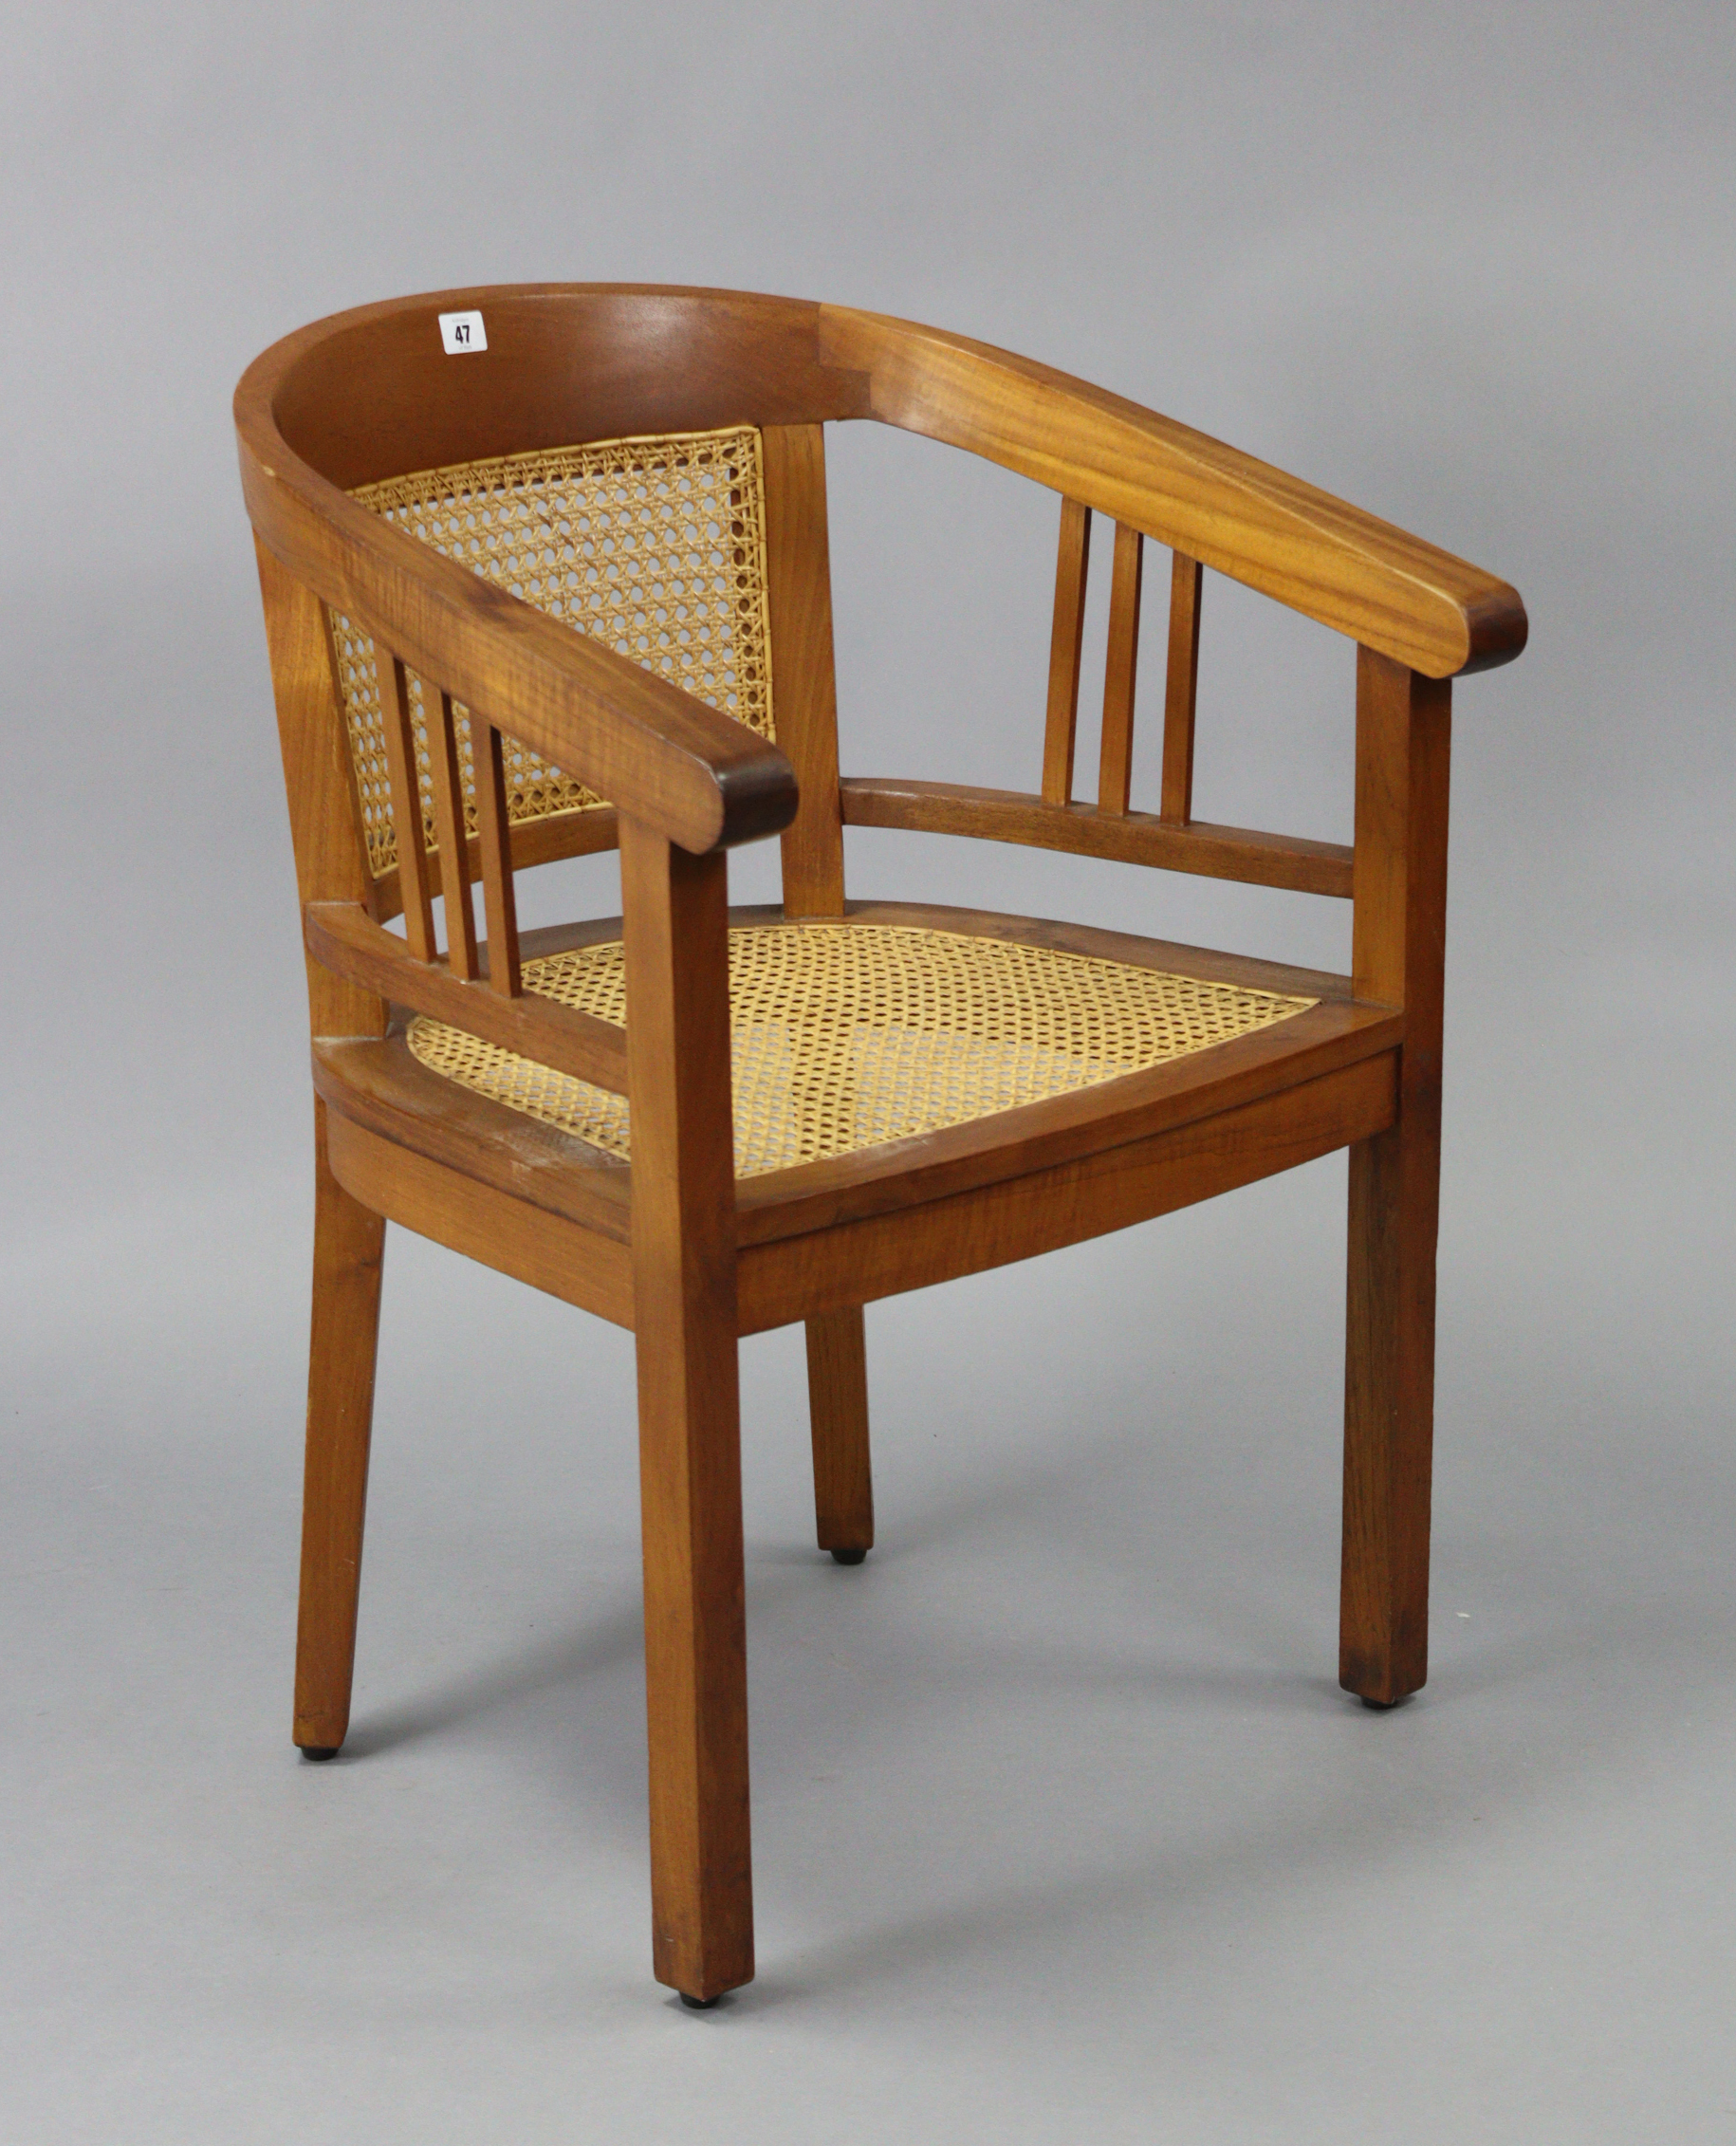 A teak tub-shaped chair inset woven-cane panel to the seat & back, & on square tapered legs.